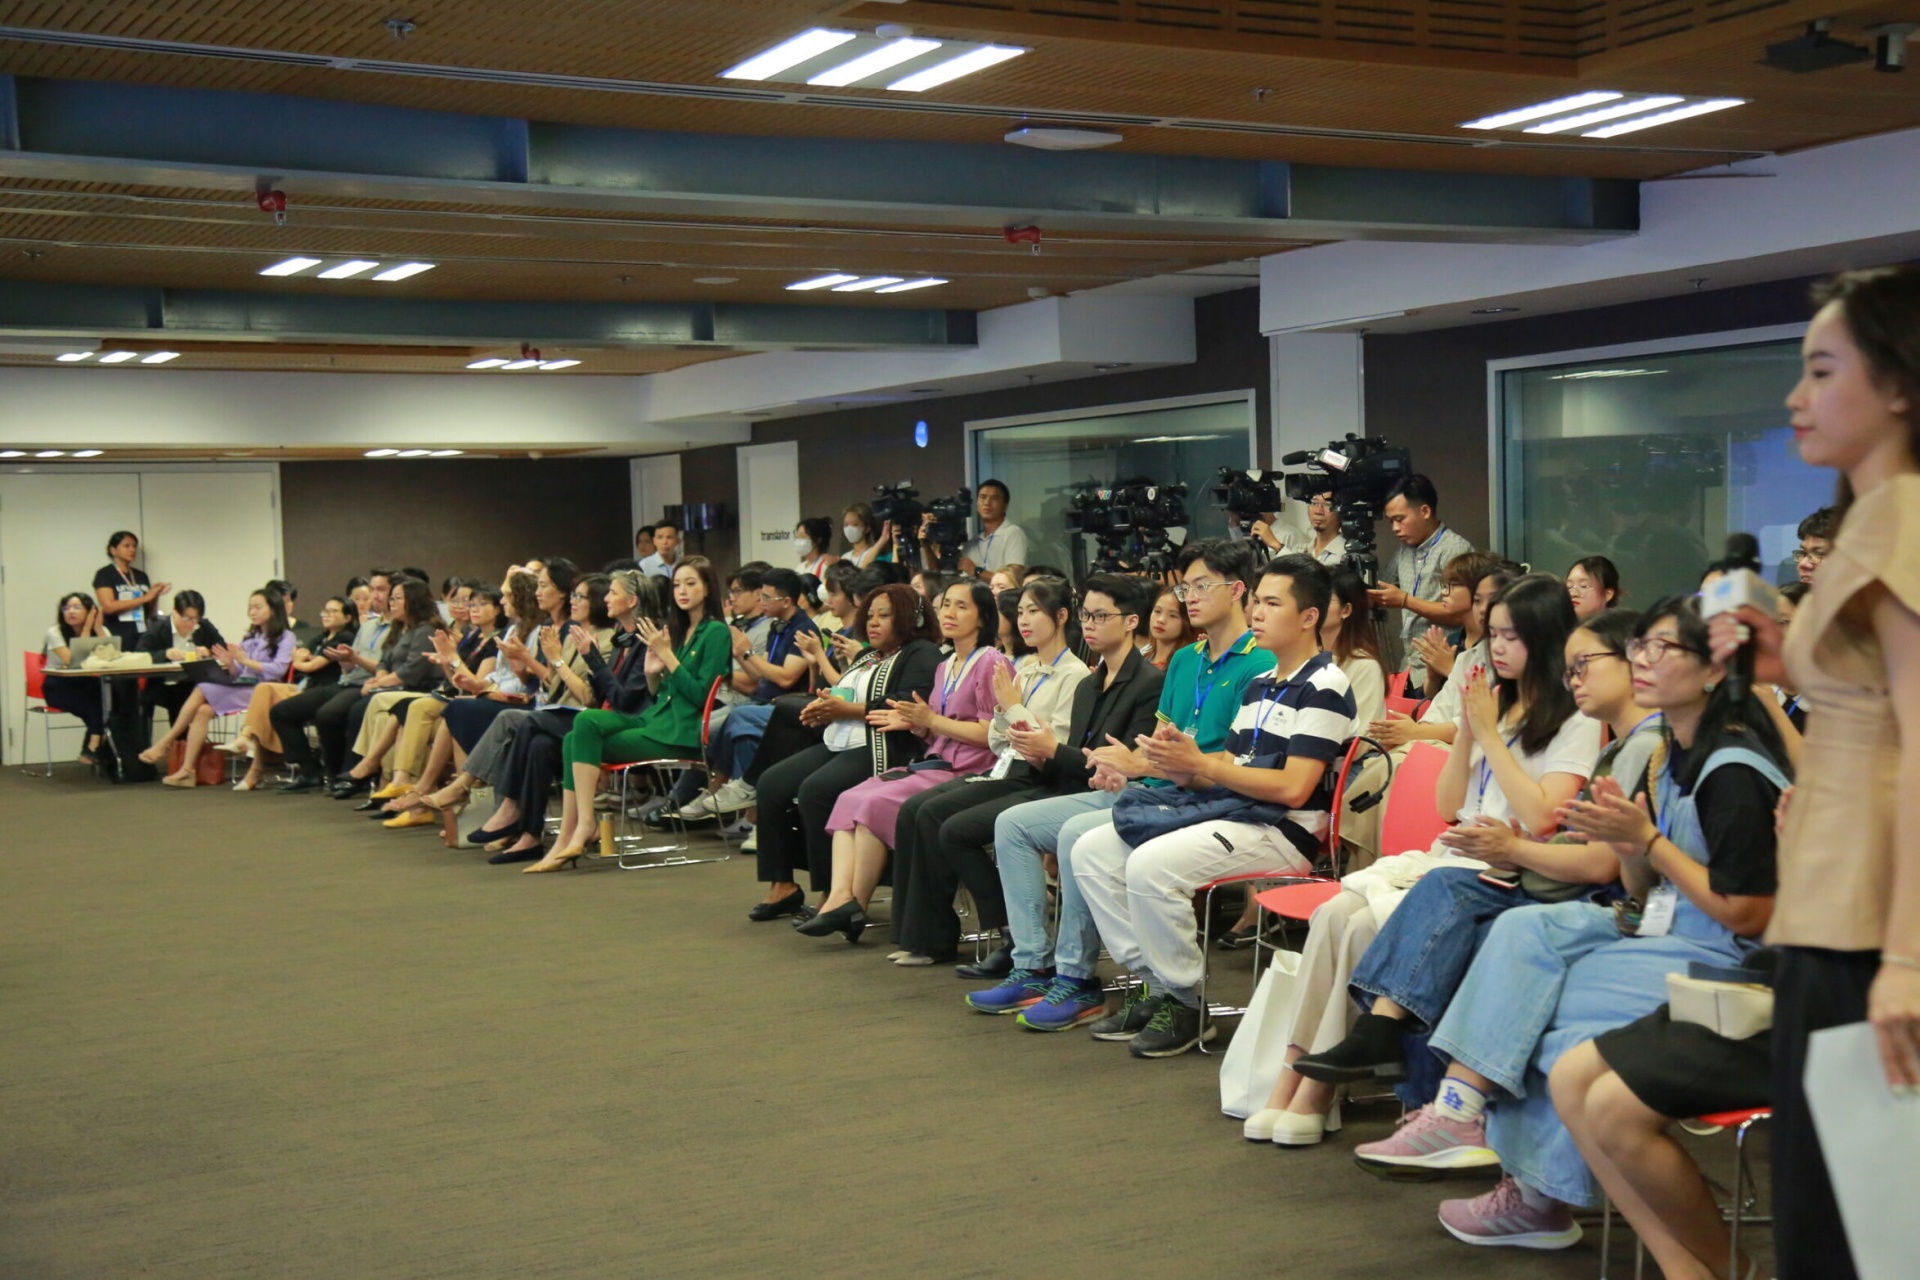 the Green United Nations House in Ha Noi welcomed over 50 young changemakers to commemorate International Youth Day on August 12.